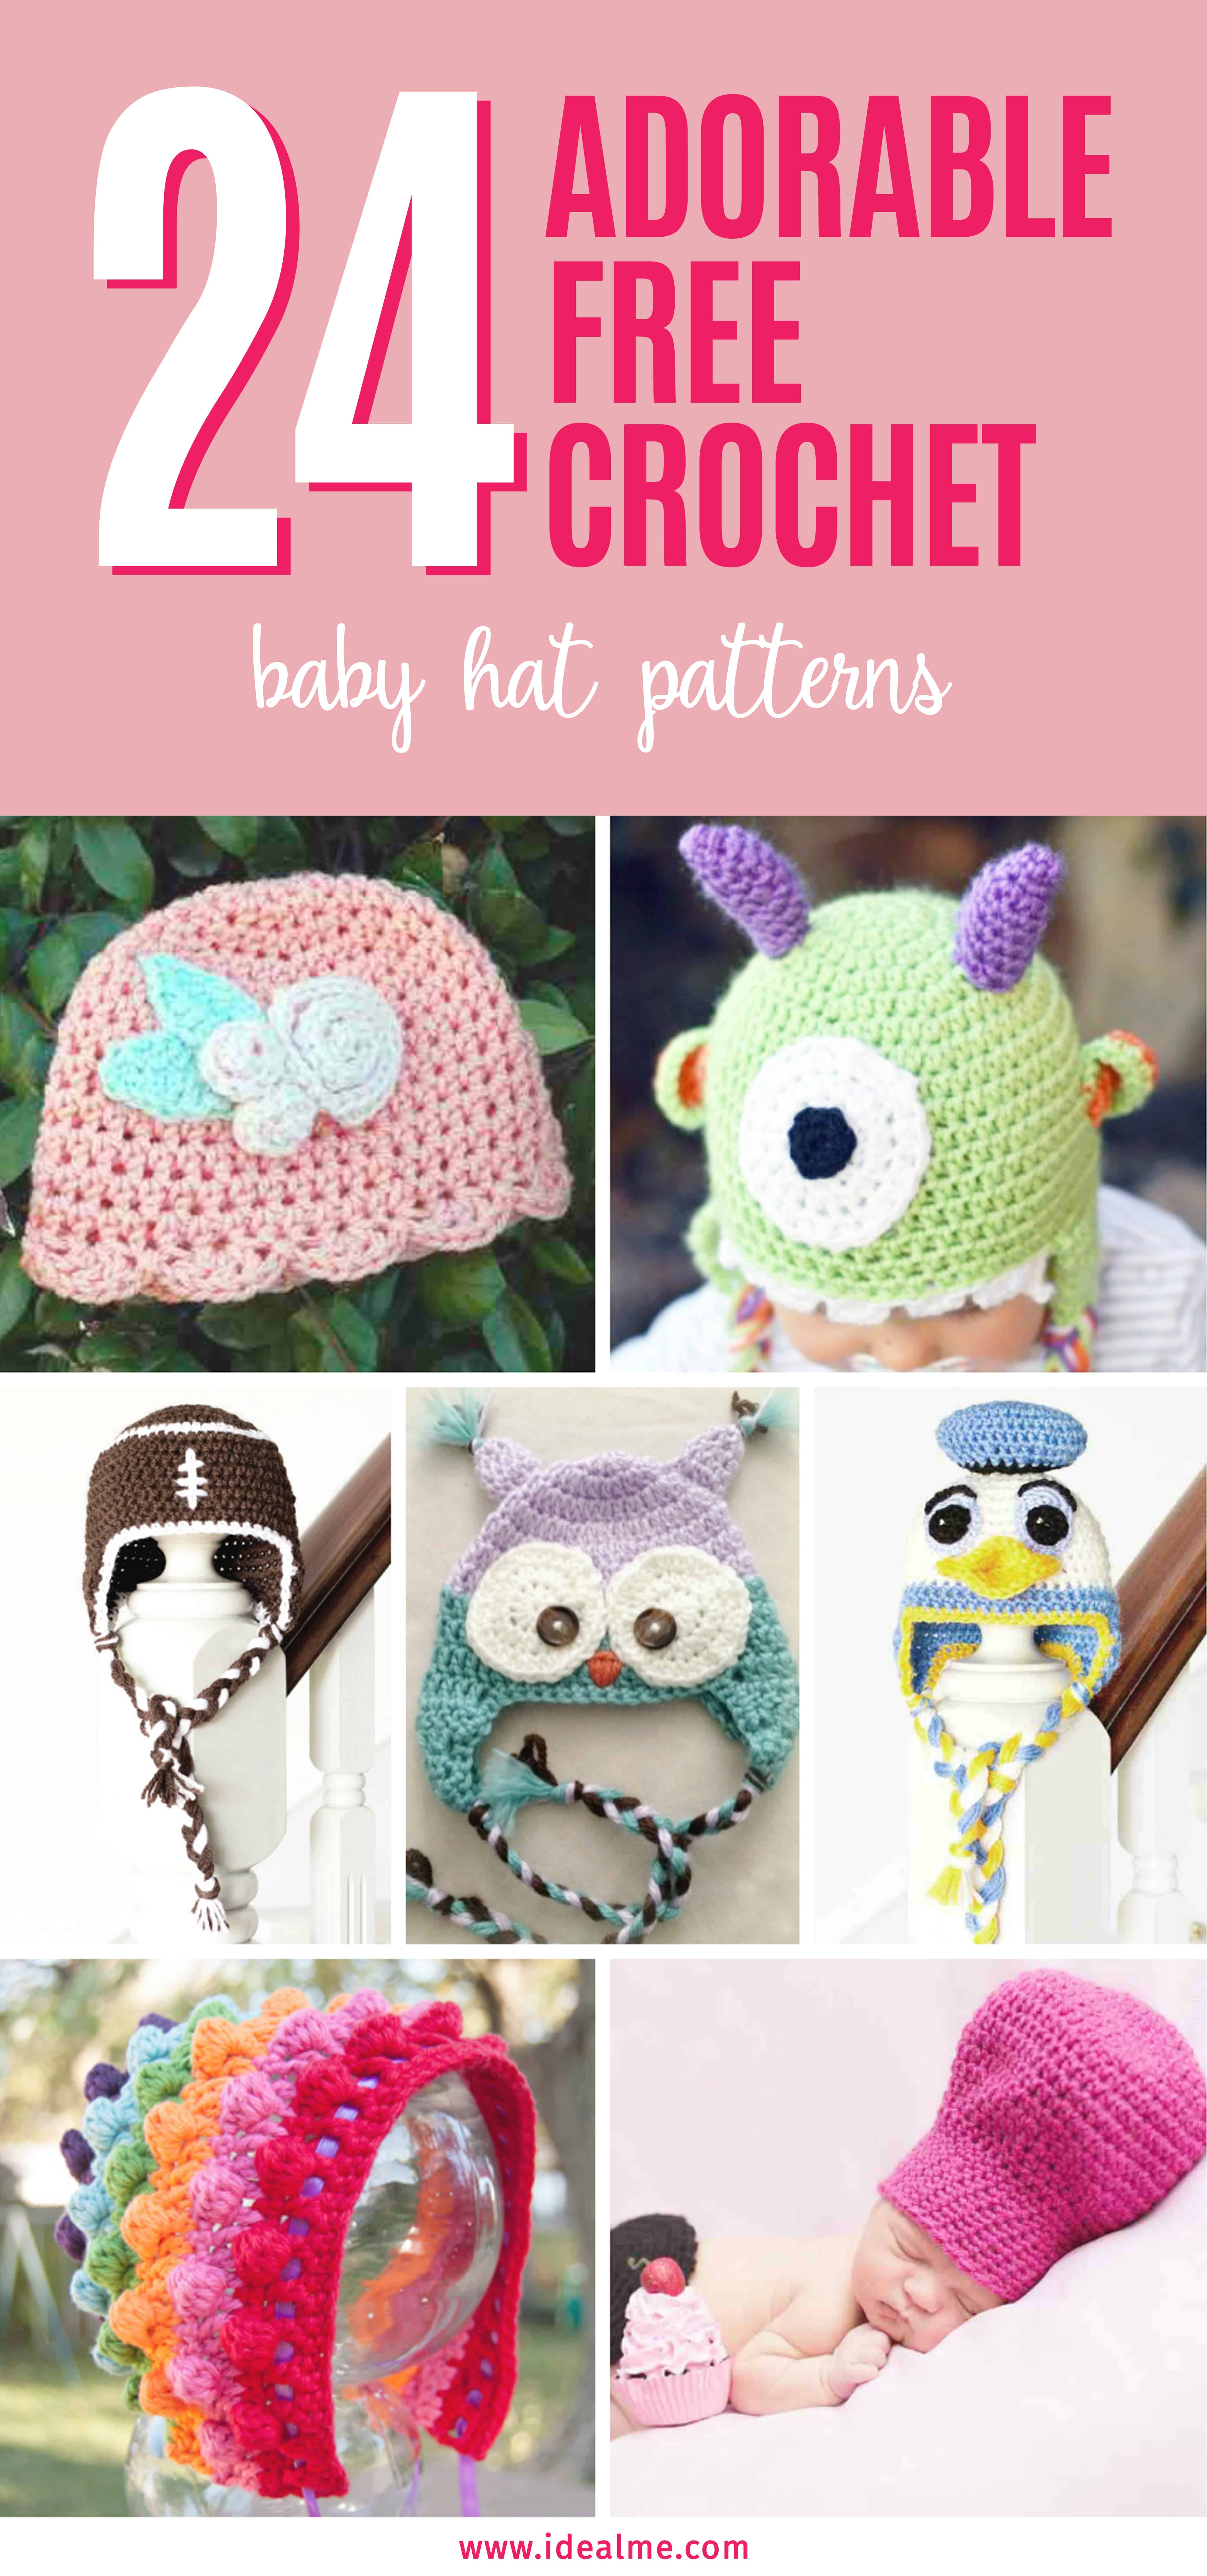 #freecrochetbaby hat patterns will come in very handy for those who love to crochet but don’t want it to commit to huge projects. #freecrochet #crochetlove #crochetpatterns